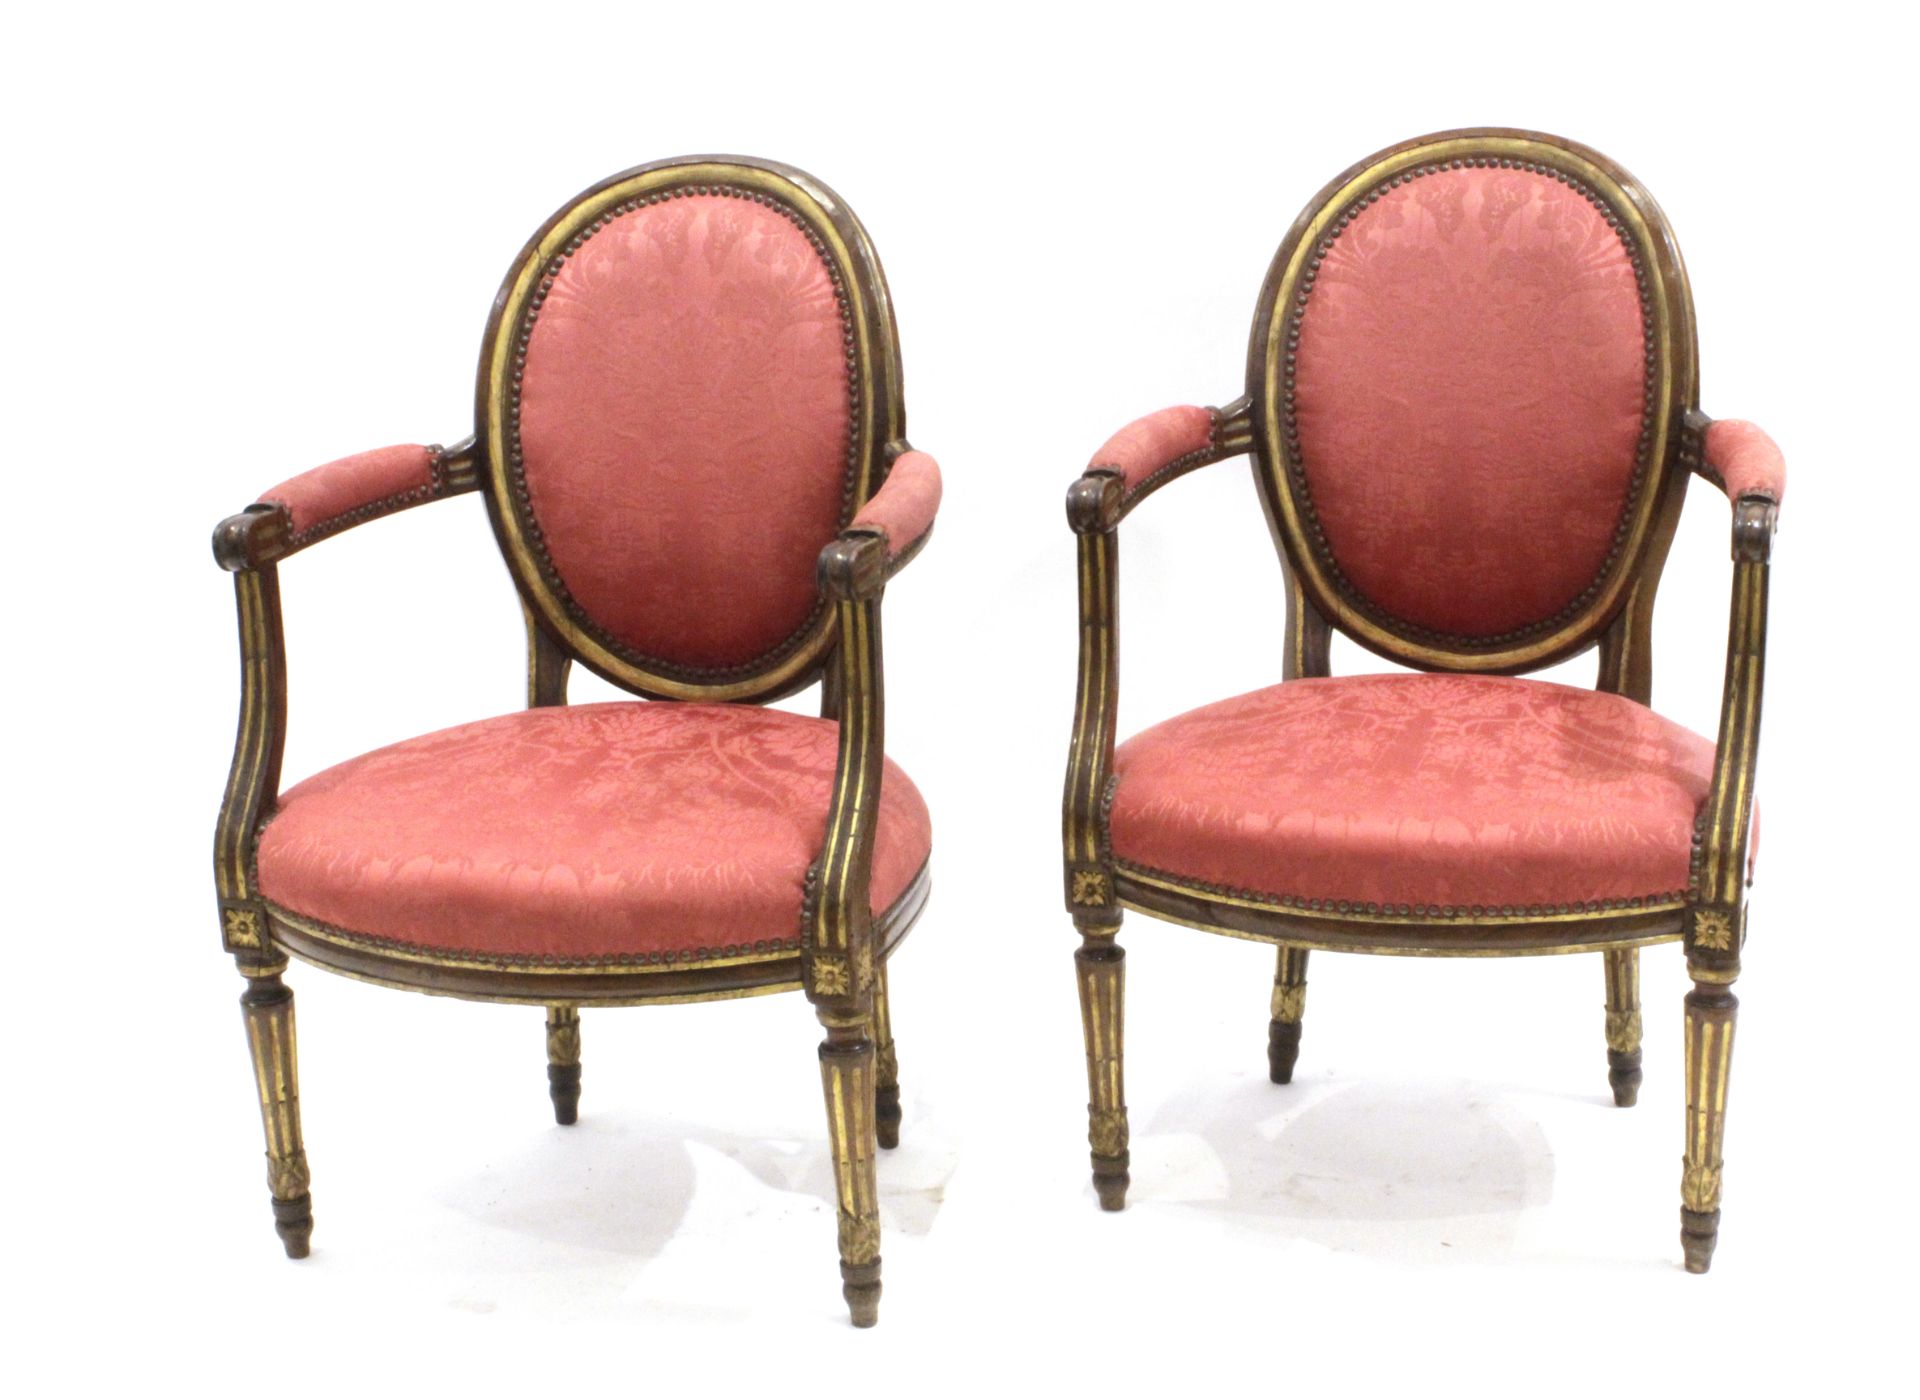 A pair of 20th century Louis XVI style armchairs